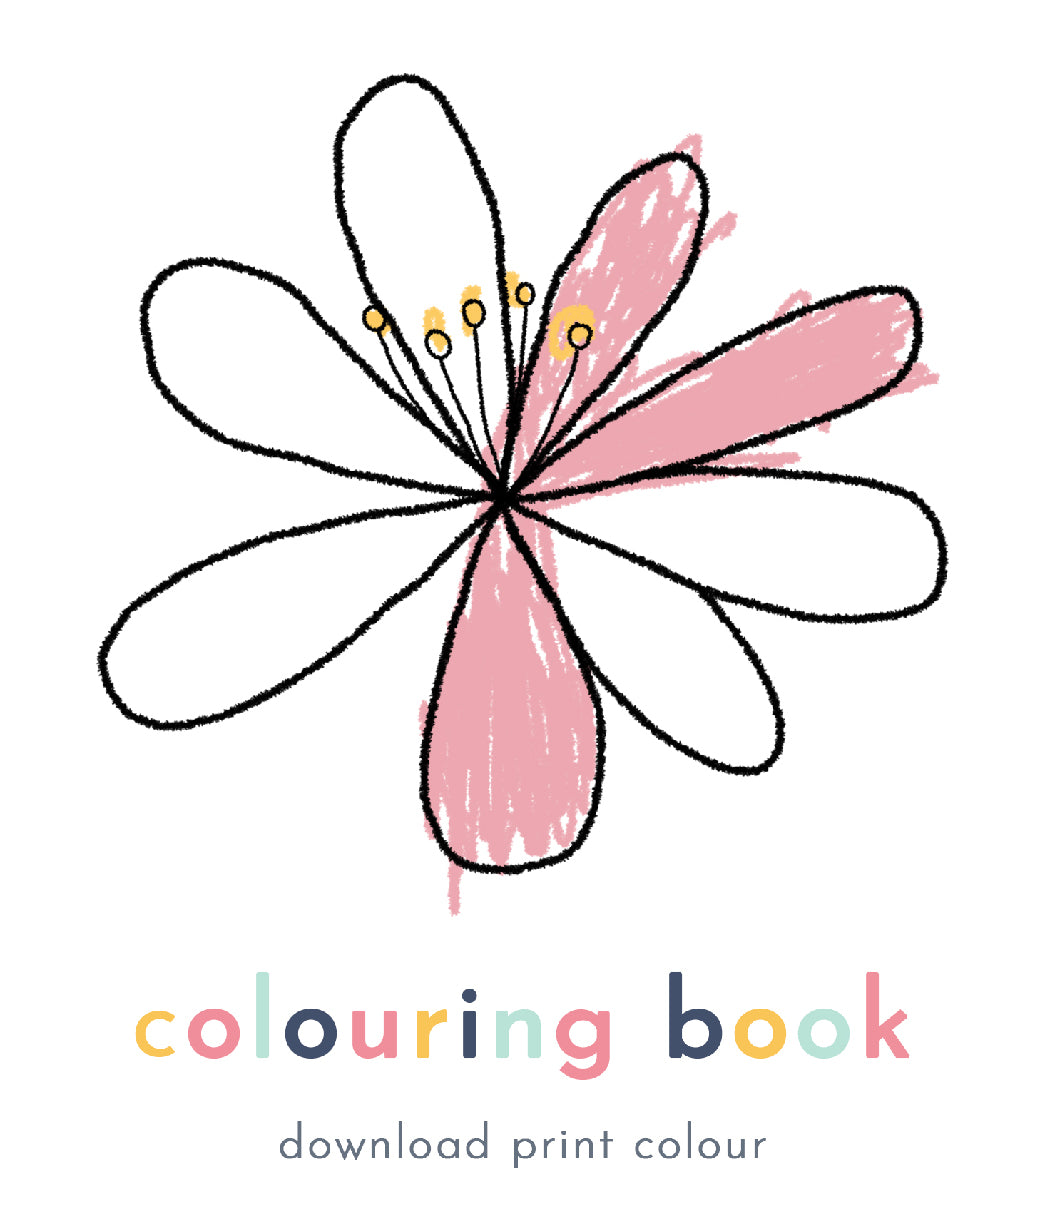 The Colouring Book